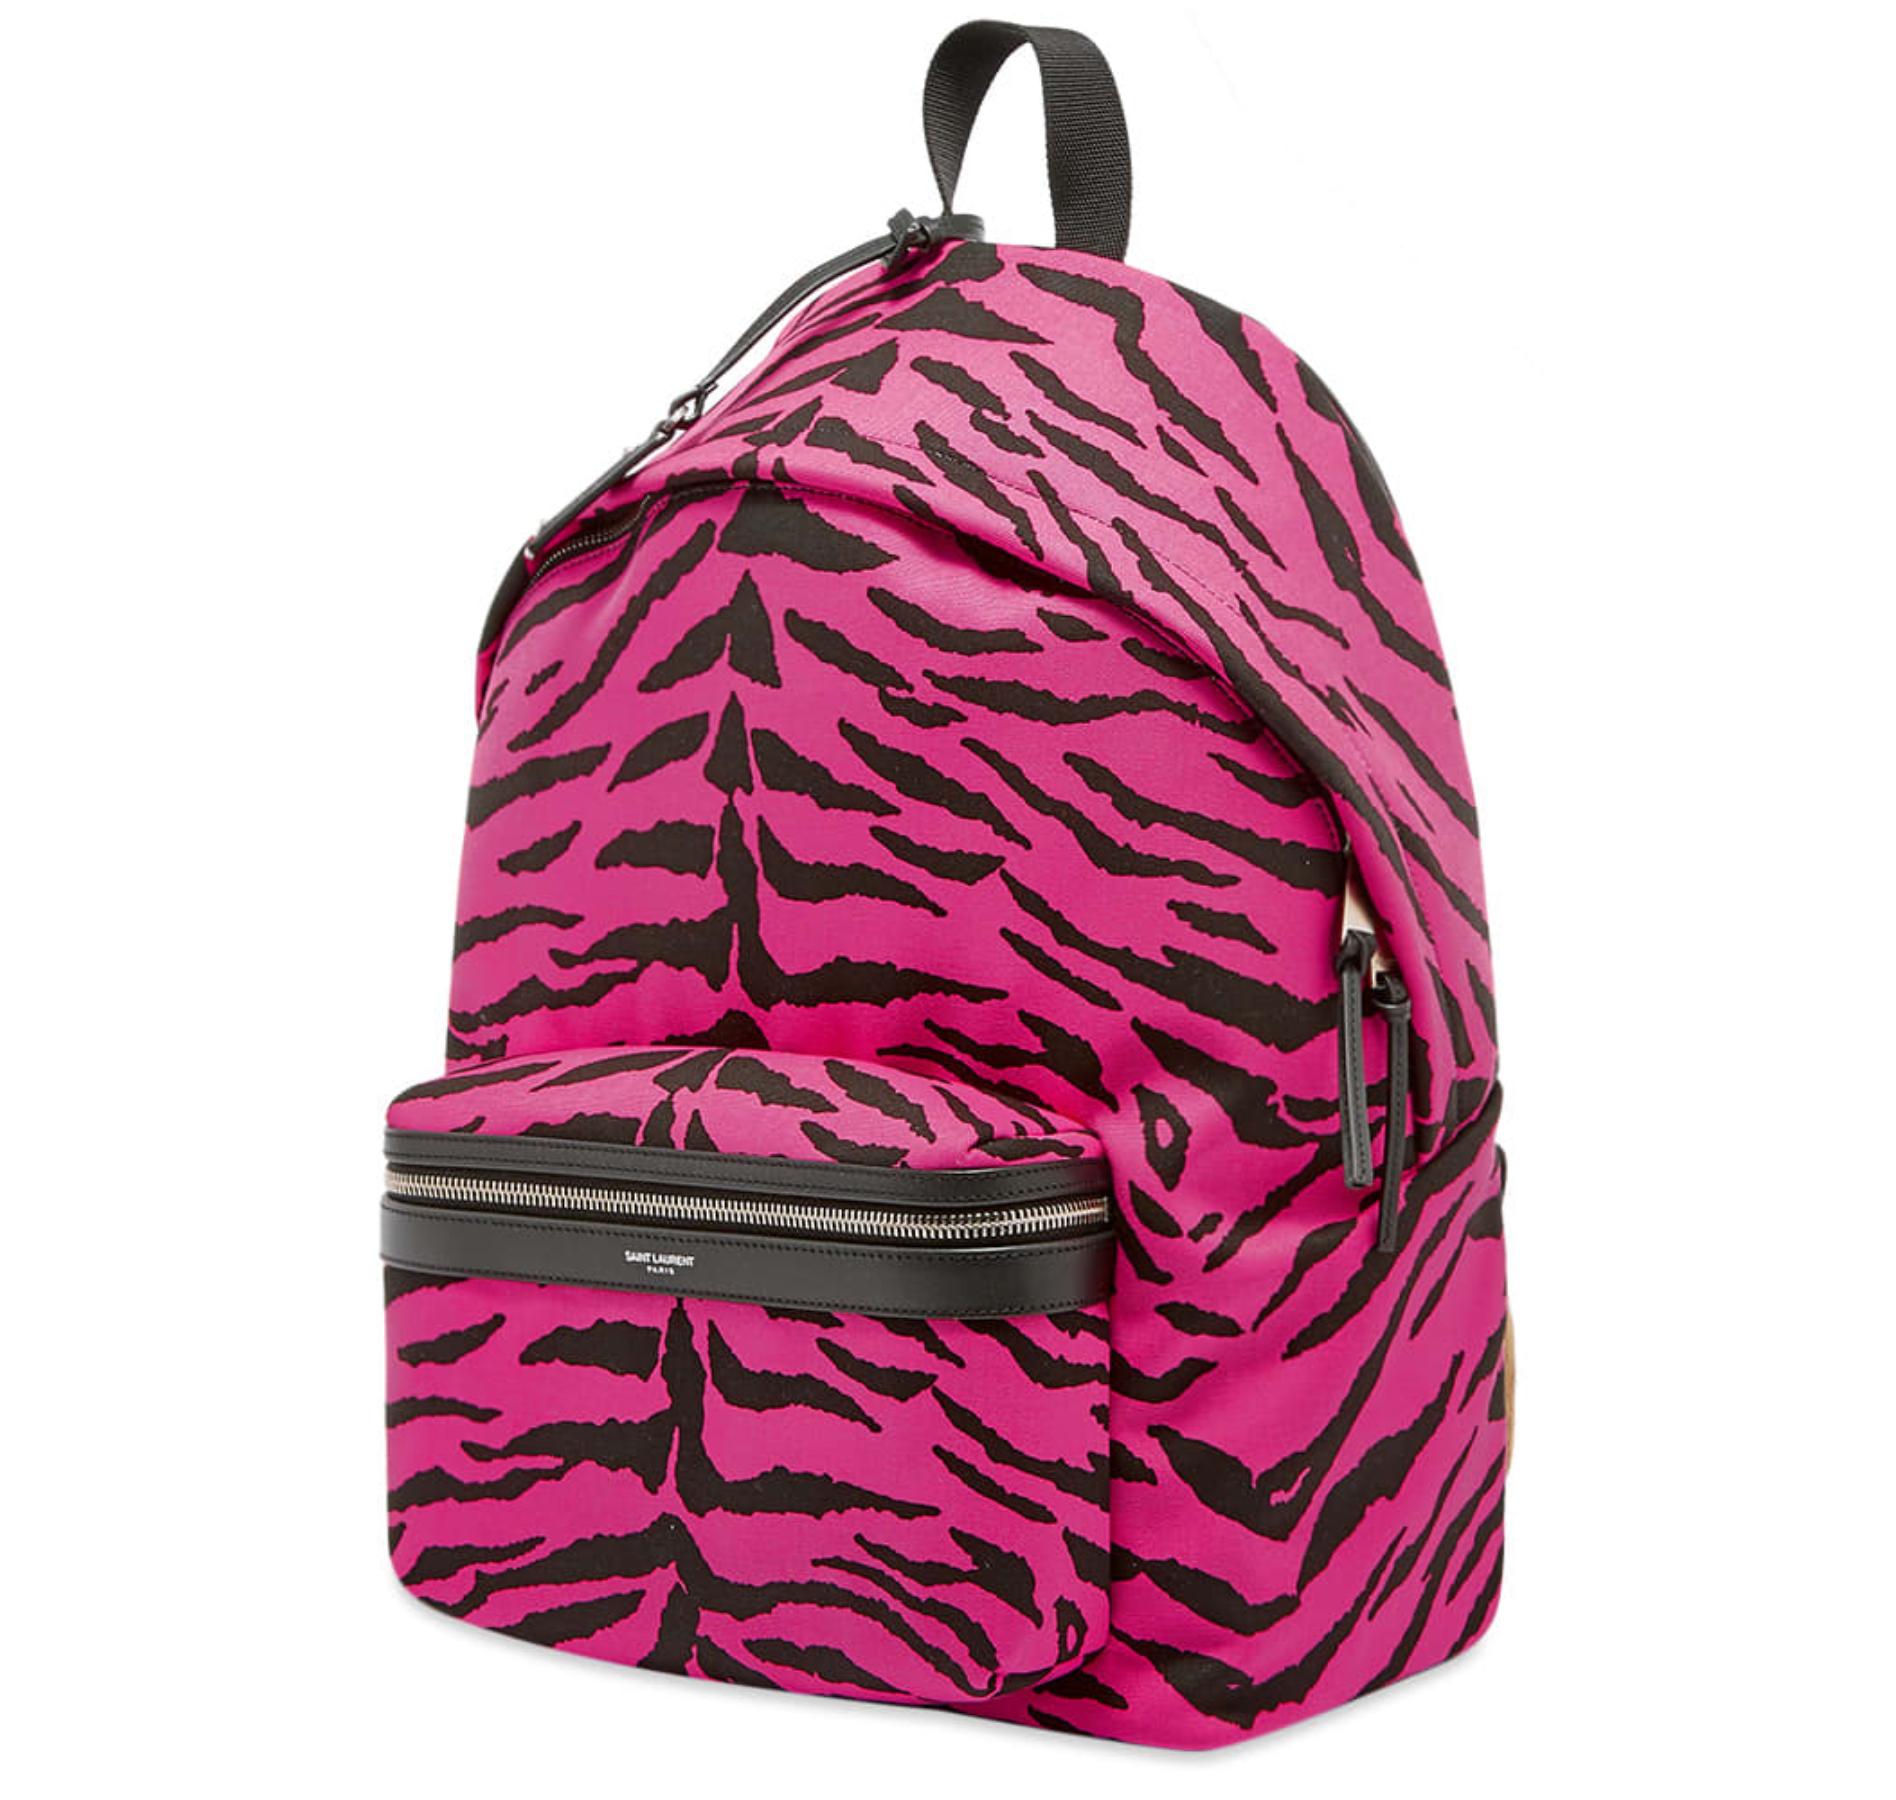 Saint Laurent Mens Pink & Black Zebra Print 'City' Backpack

Saint Laurent’s ever-popular City backpack heads into the wild and gets covered in zebra print for FW19. Sure to grab attention wherever you venture, this cotton-constructed iteration